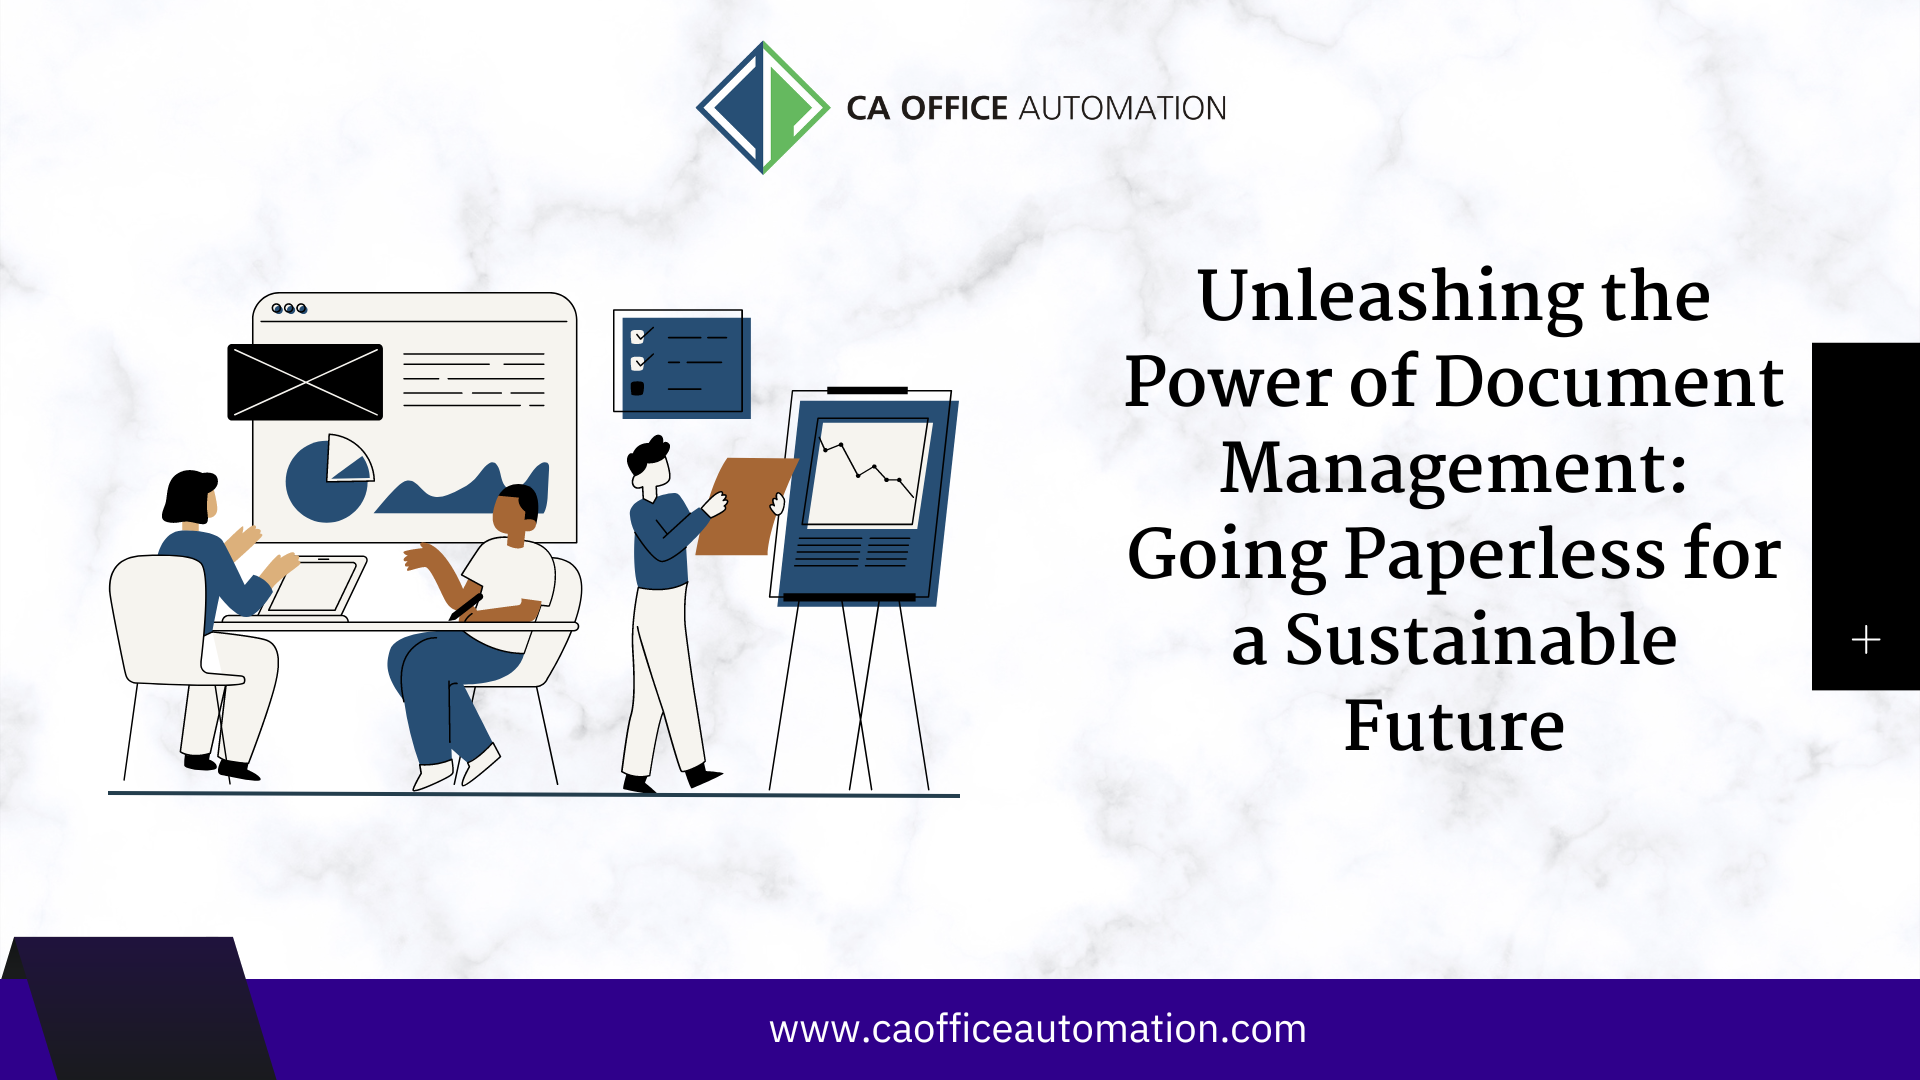 Unleashing the Power of Document Management: Going Paperless for a Sustainable Future